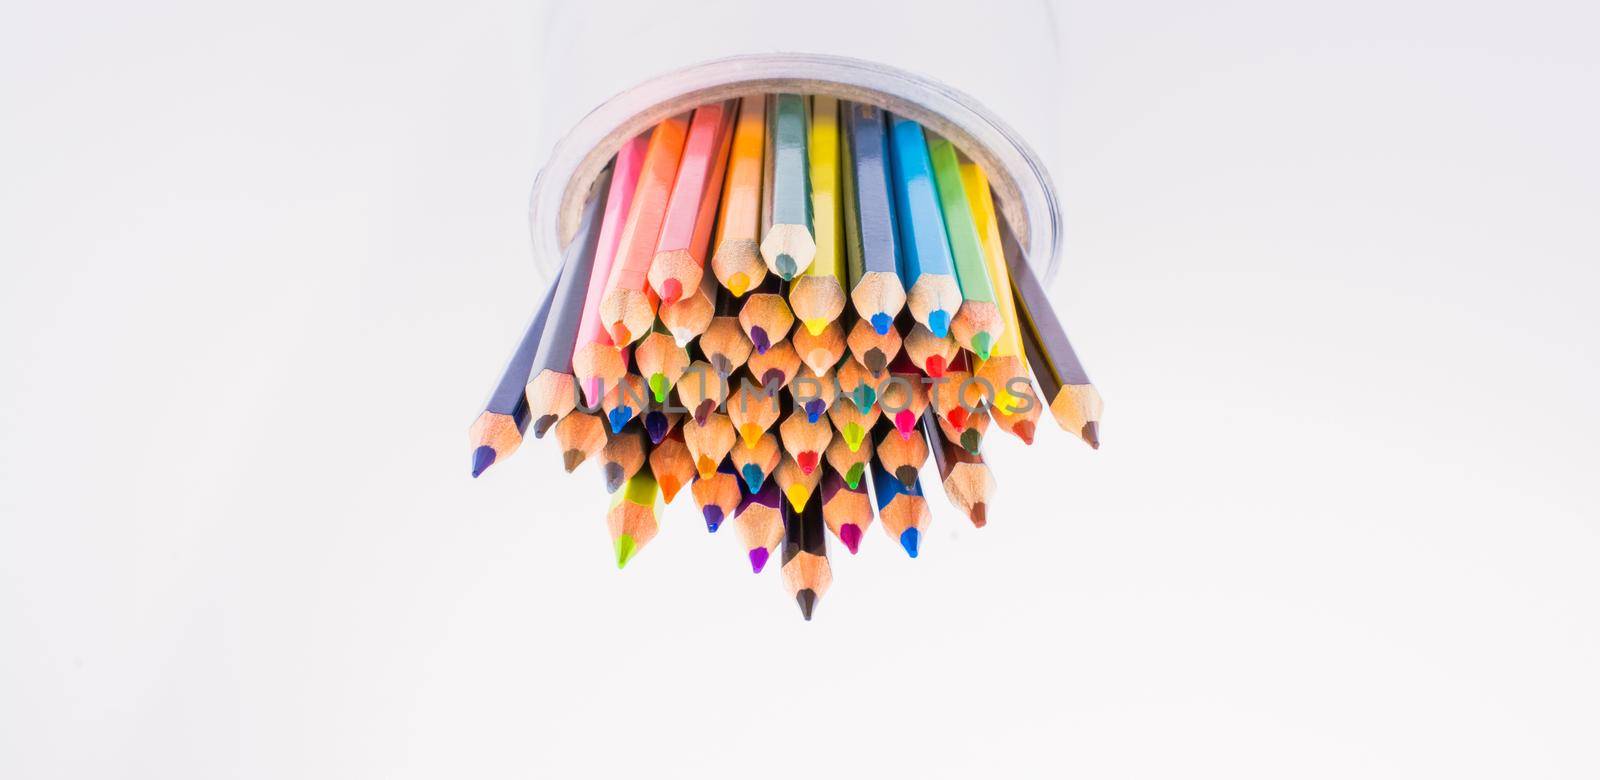 colorful pencils in a vase on a white background